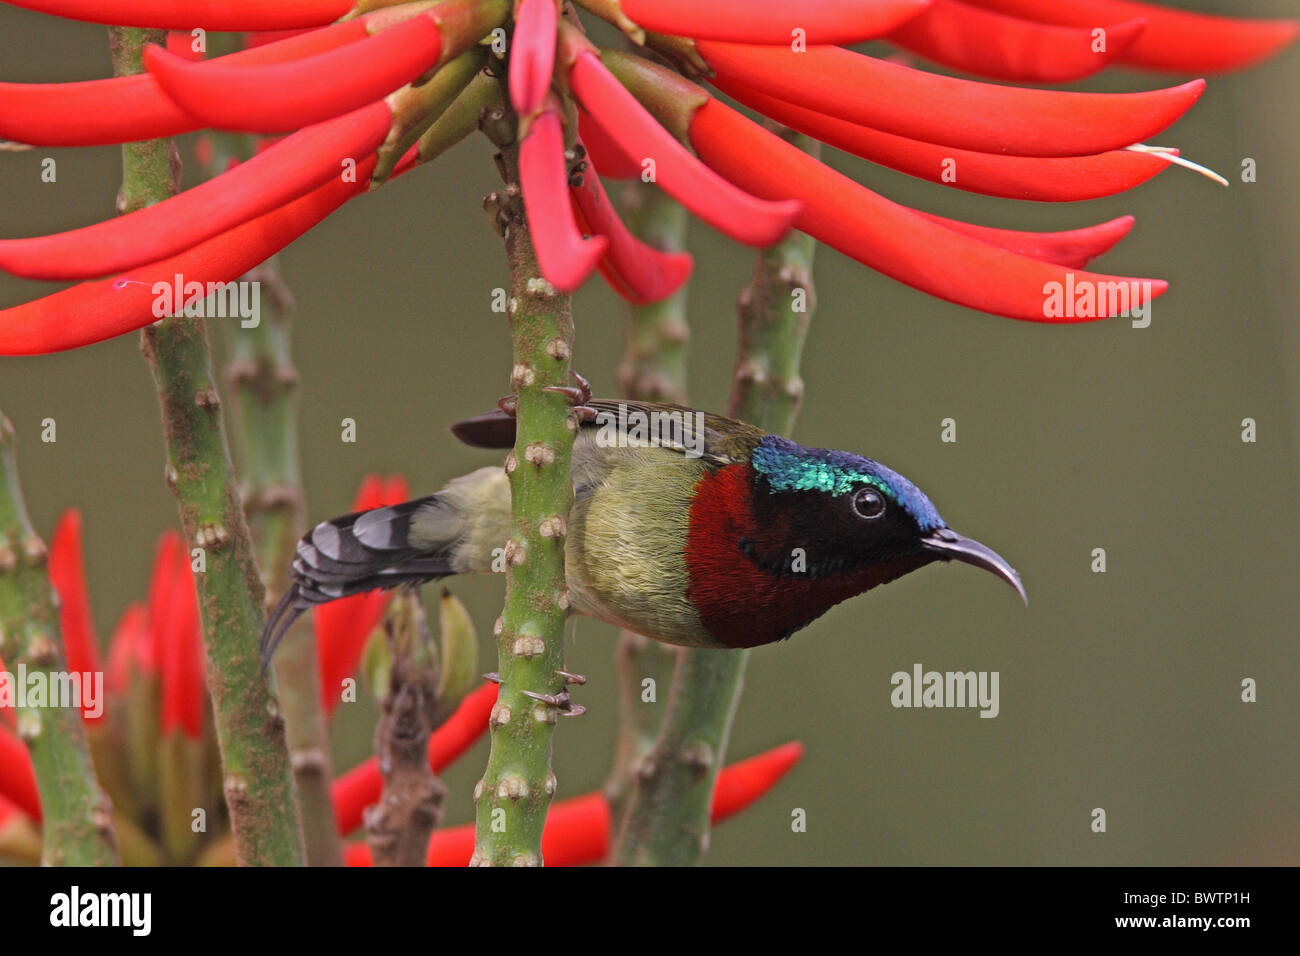 Fork-tailed Sunbird (Aethopyga christinae) adult male, perched in Red Hot Poker Tree (Erythrina speciosa), Hong Kong, China, m Stock Photo